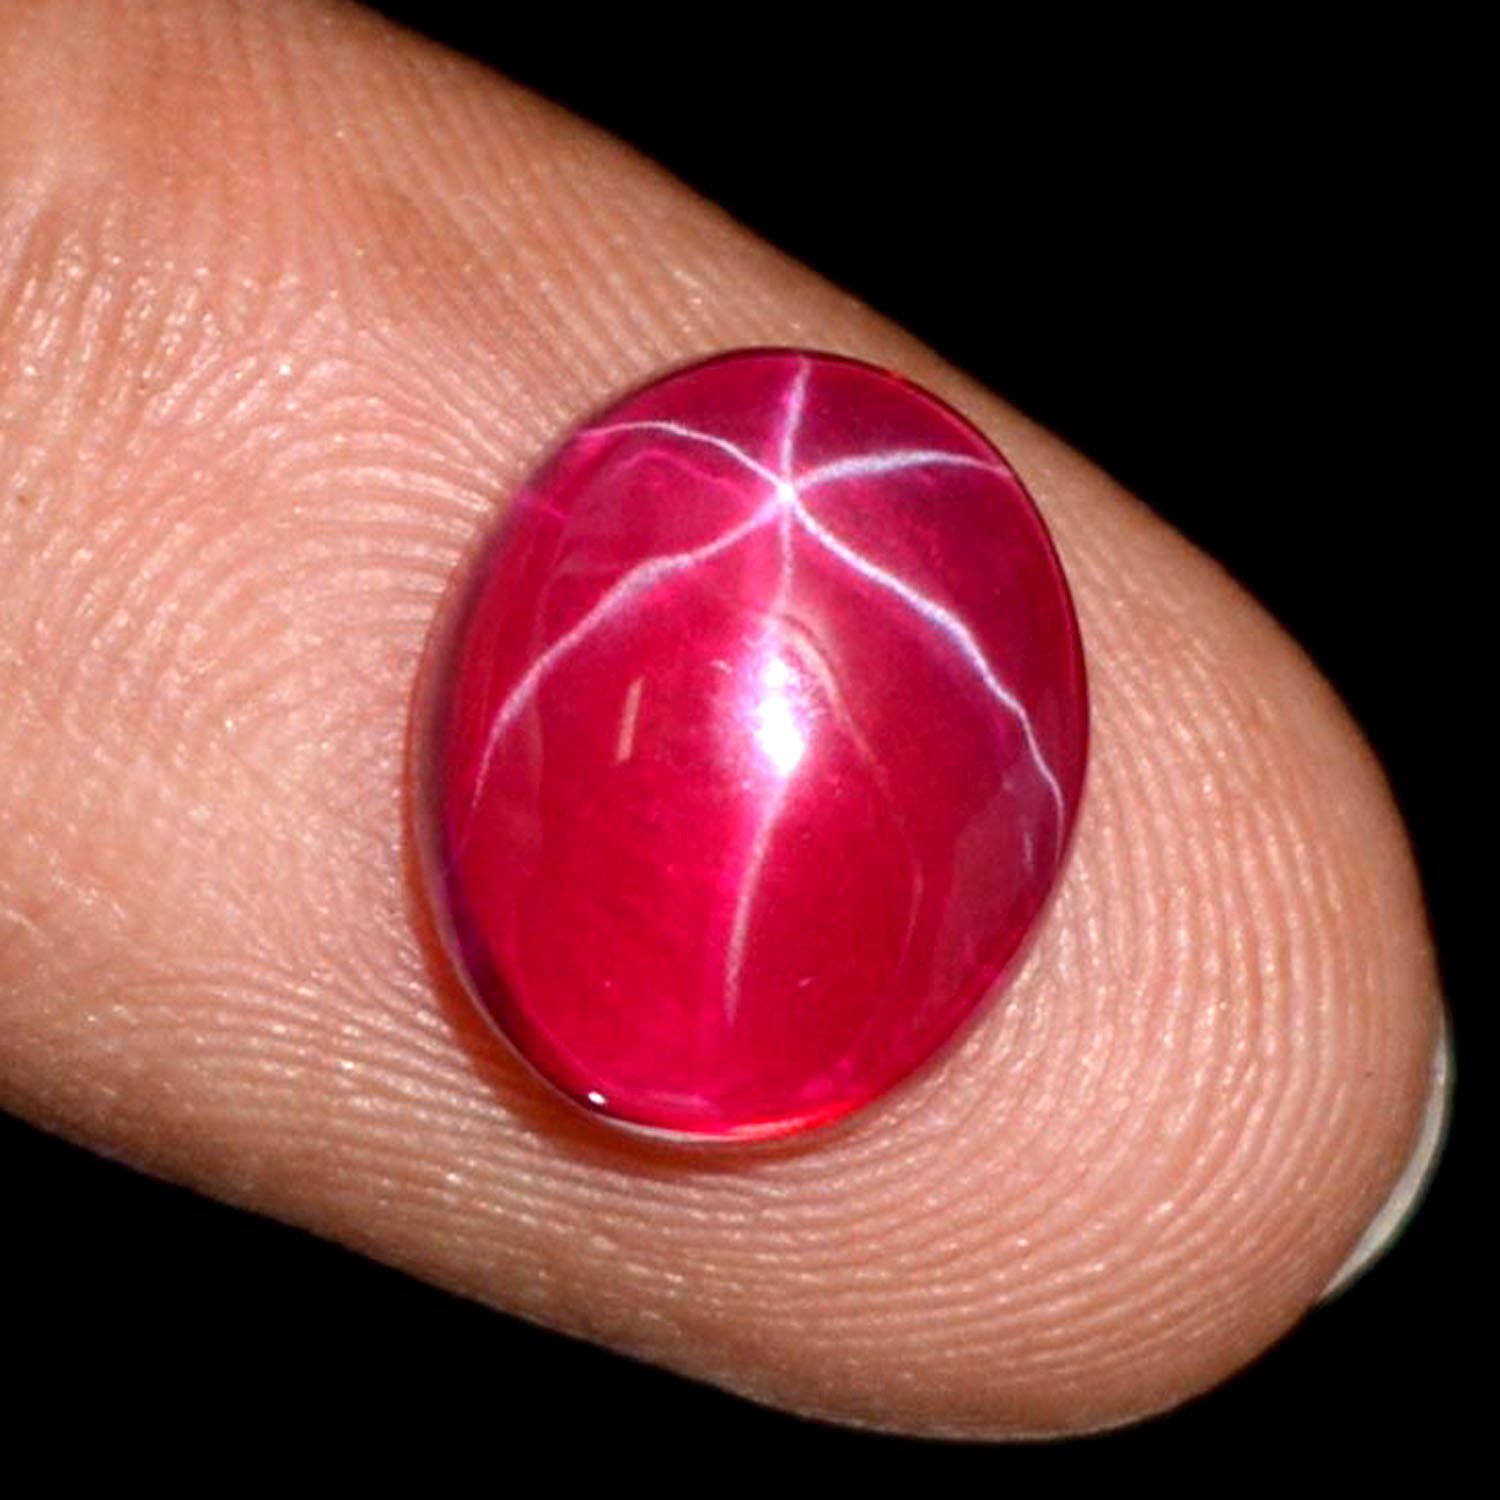 GEMHUB Tiny 6 Rays Red Star Ruby Loose Gemstone Approximate 5.20 Ct. BP-241